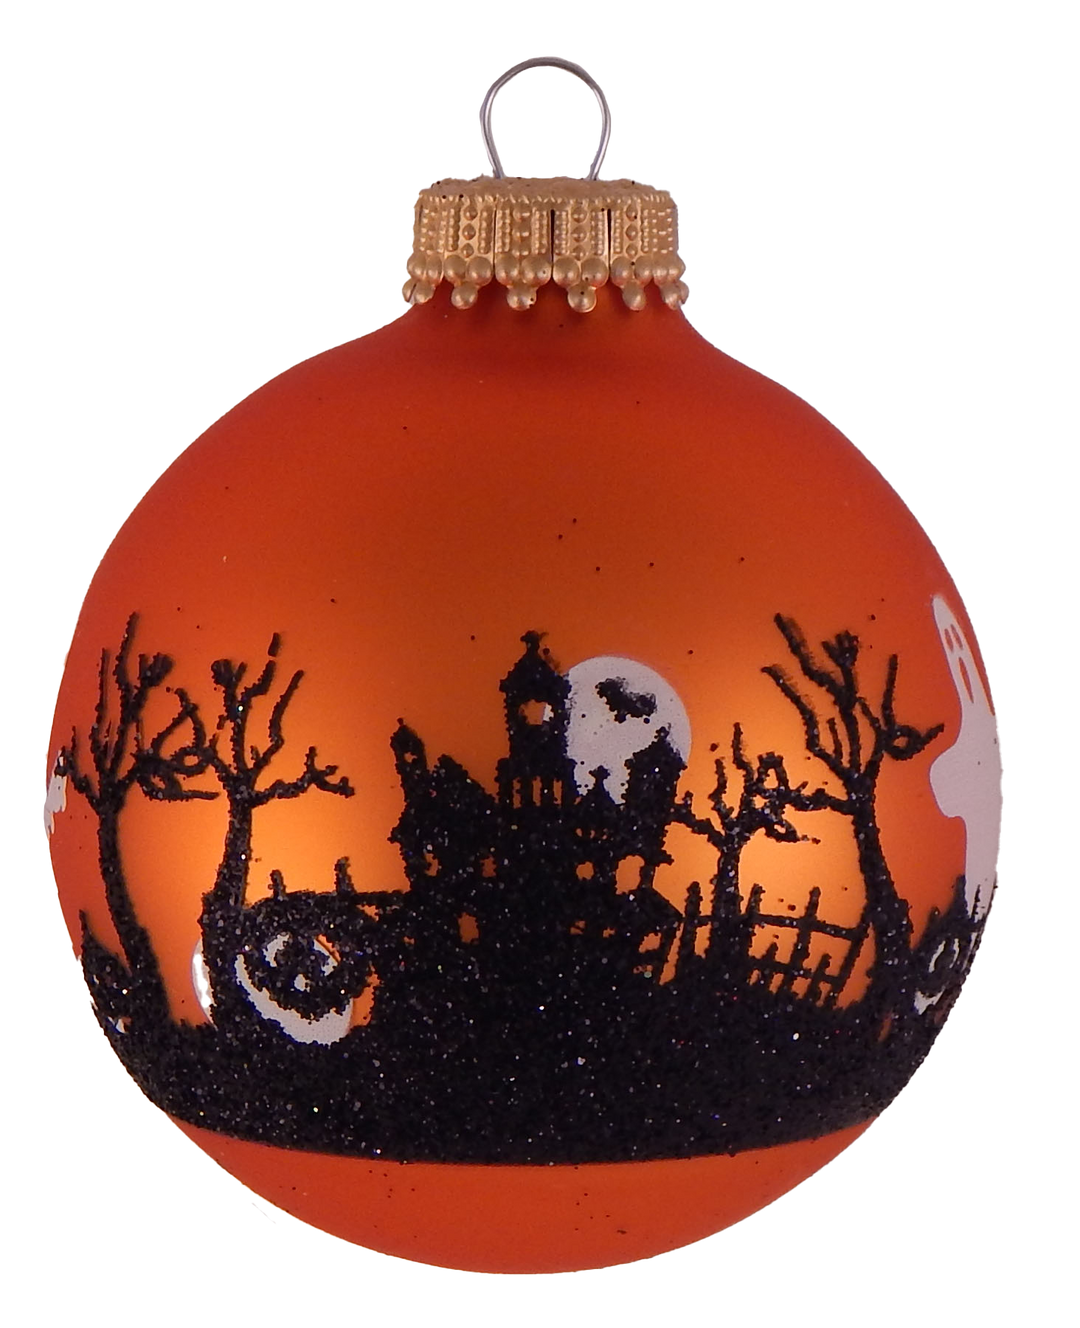 Halloween Tree Ornaments - 67mm/2.625" Decorated Glass Balls from Christmas by Krebs - Handmade Seamless Hanging Holiday Decorations for Trees - Set of 4 (Velvet Wildfire Orange with Graveyard)